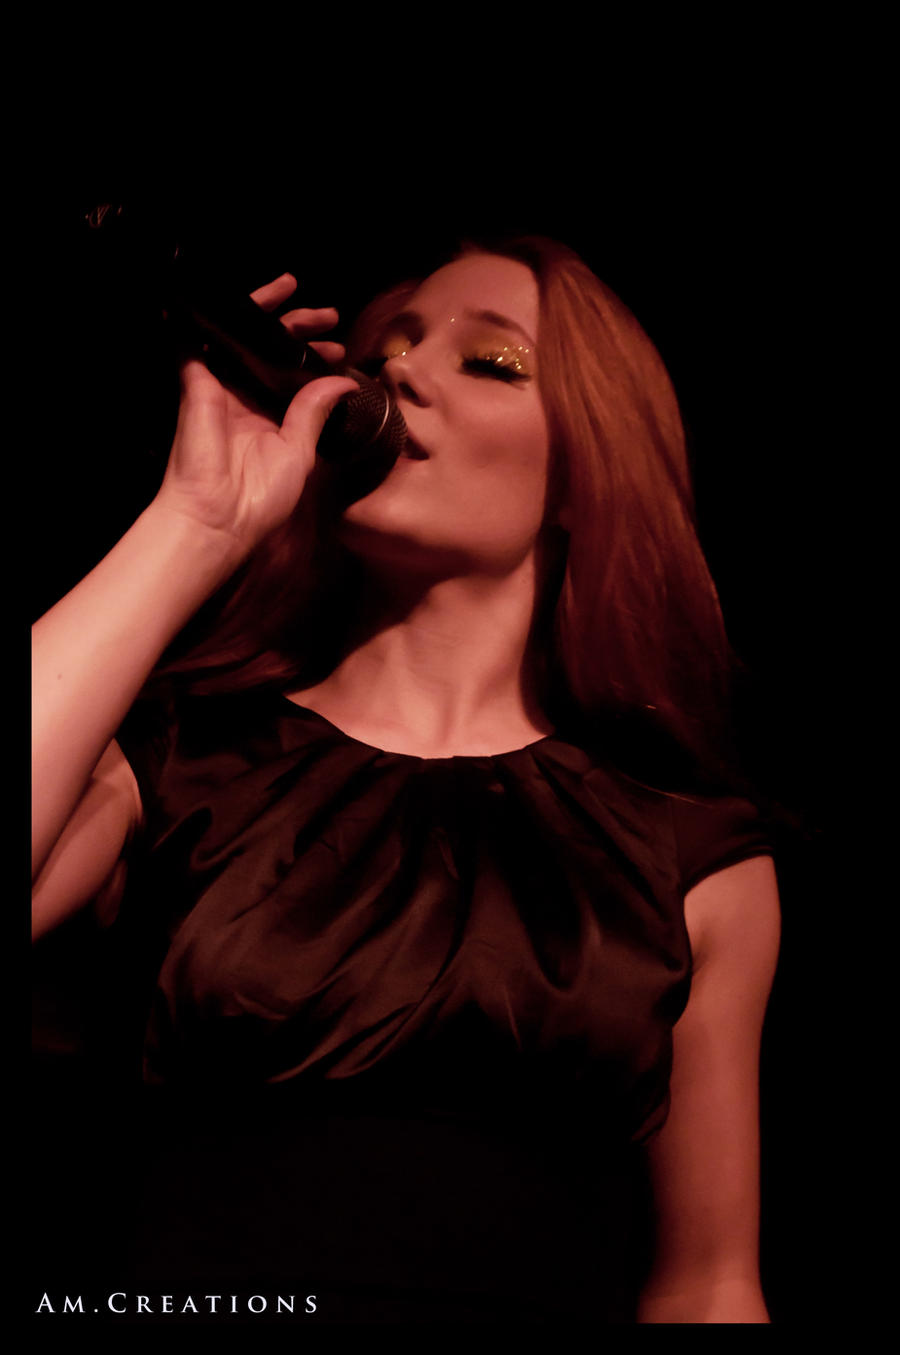 Simone Simons. Live Norway 16 by AmCreationss on DeviantArt